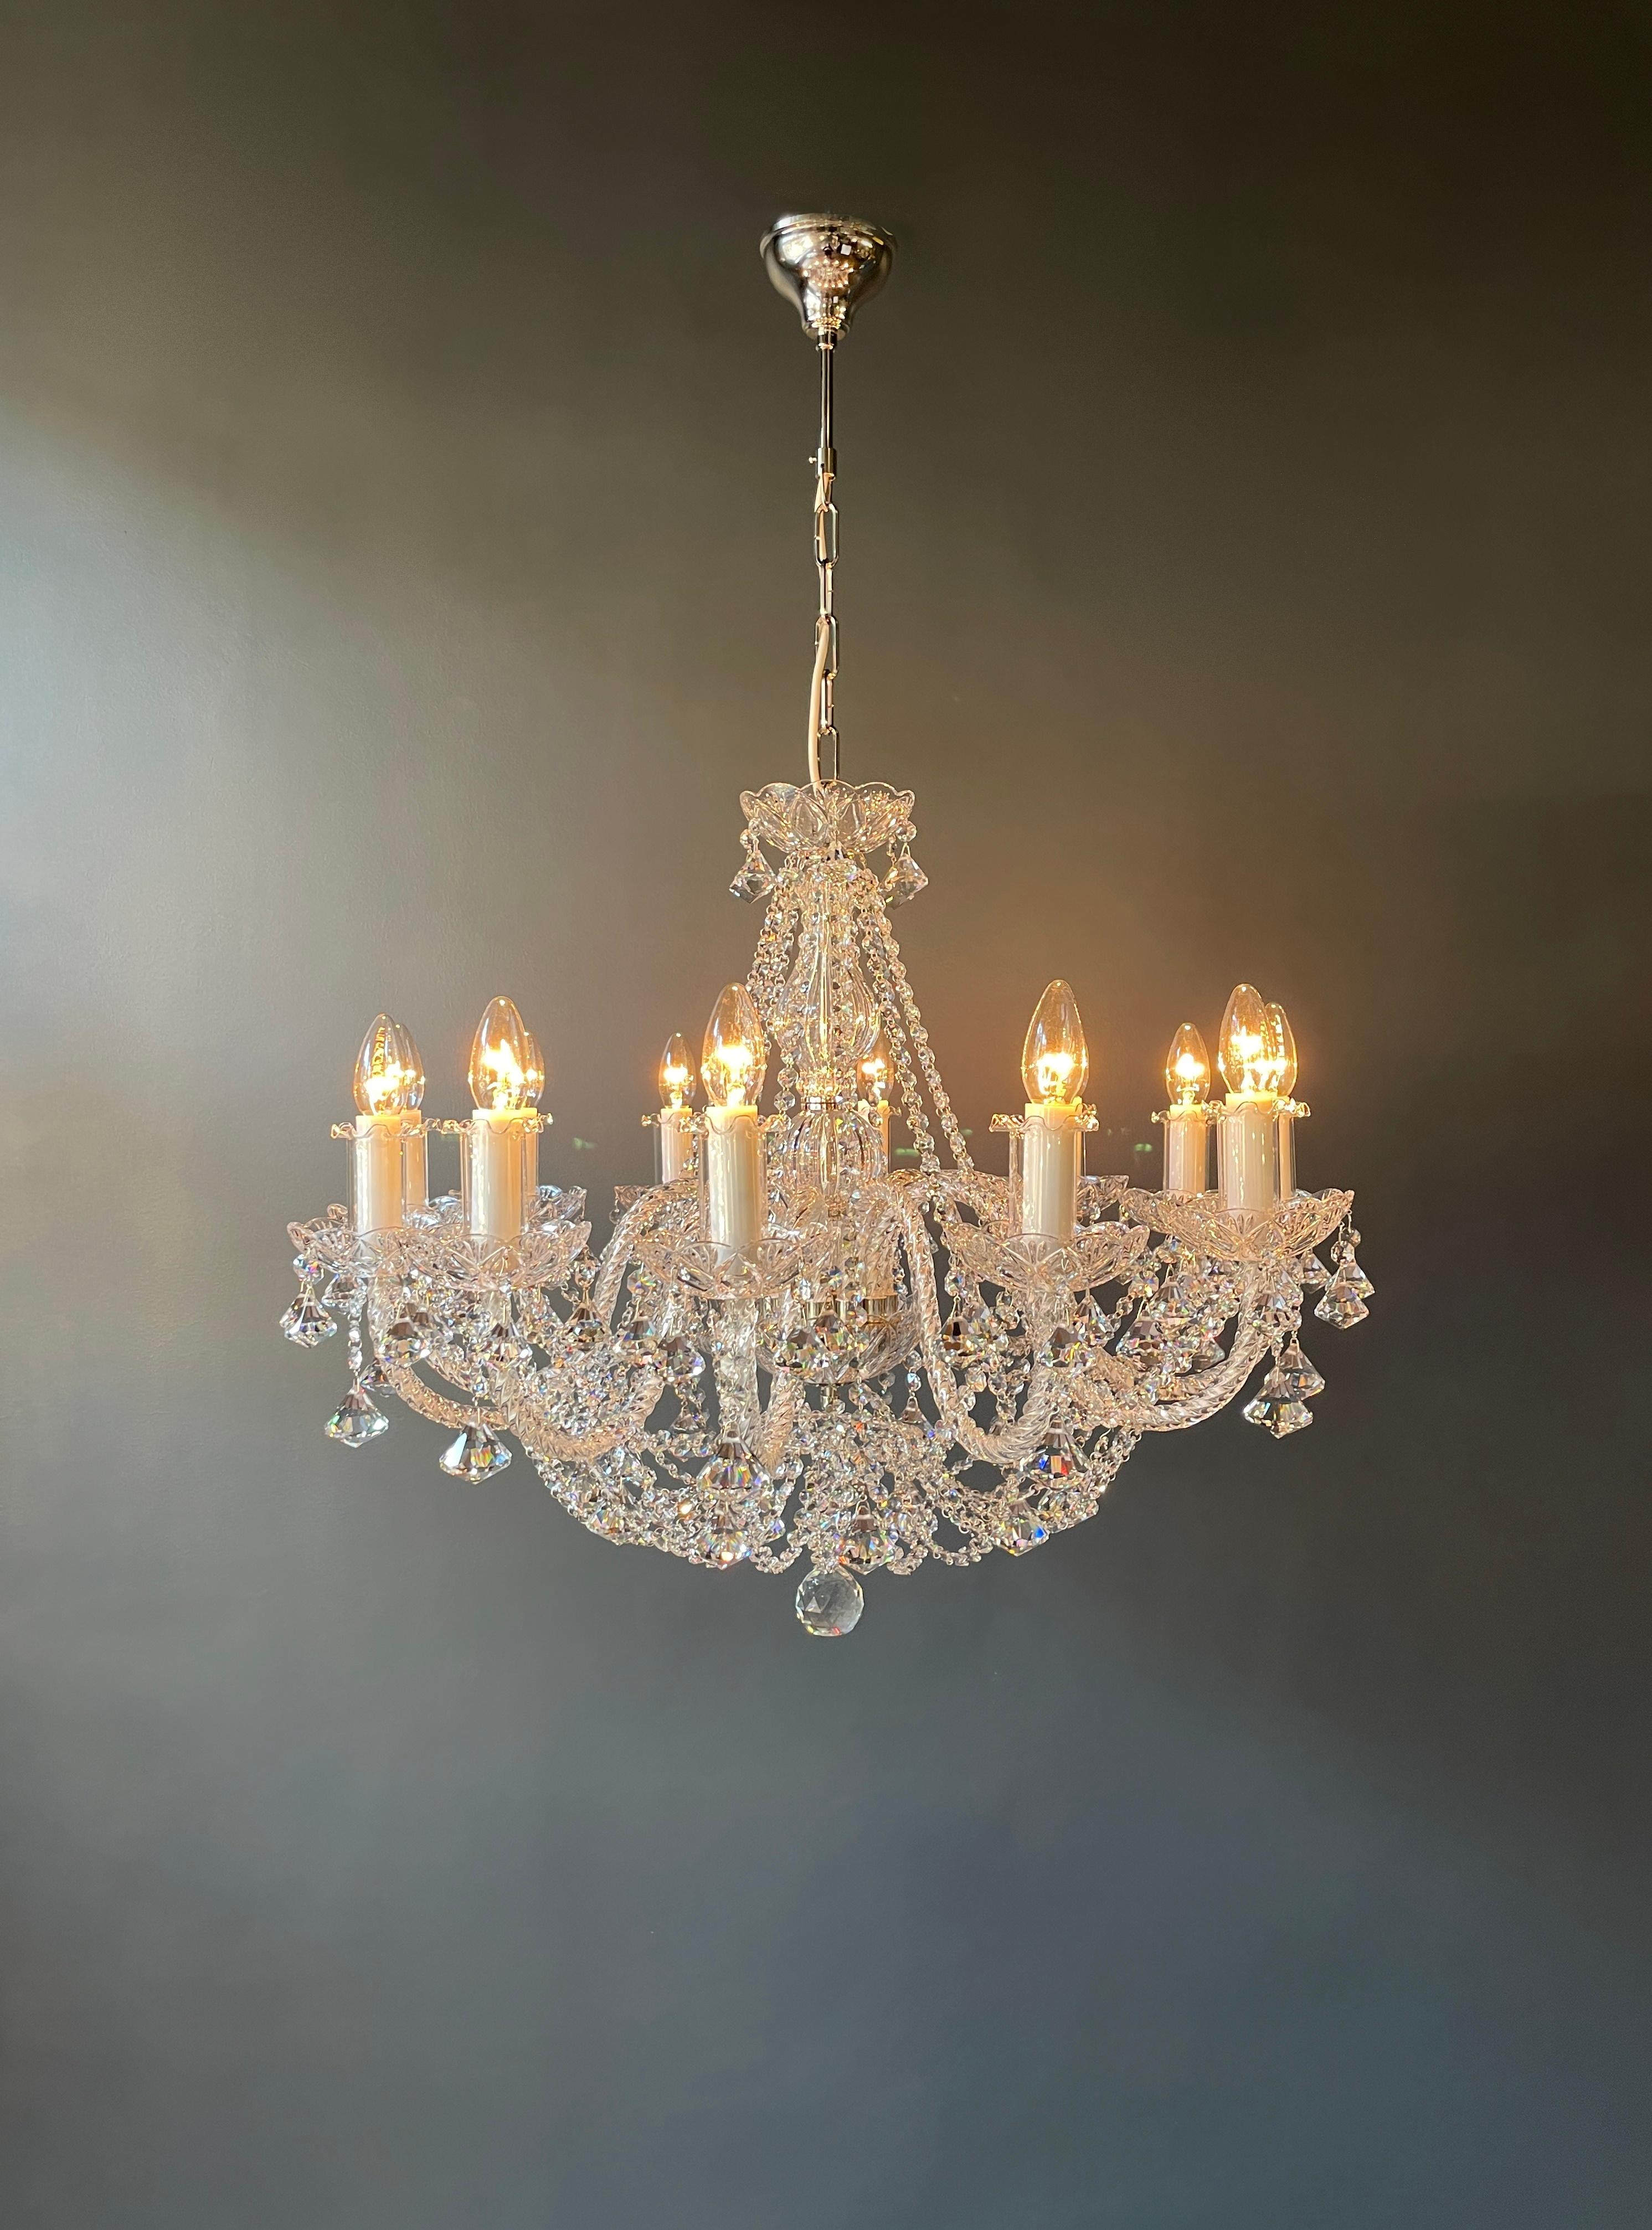 Hand-Knotted Bohemian Chandelier Art Nouveau Sparkling Crystals For Sale